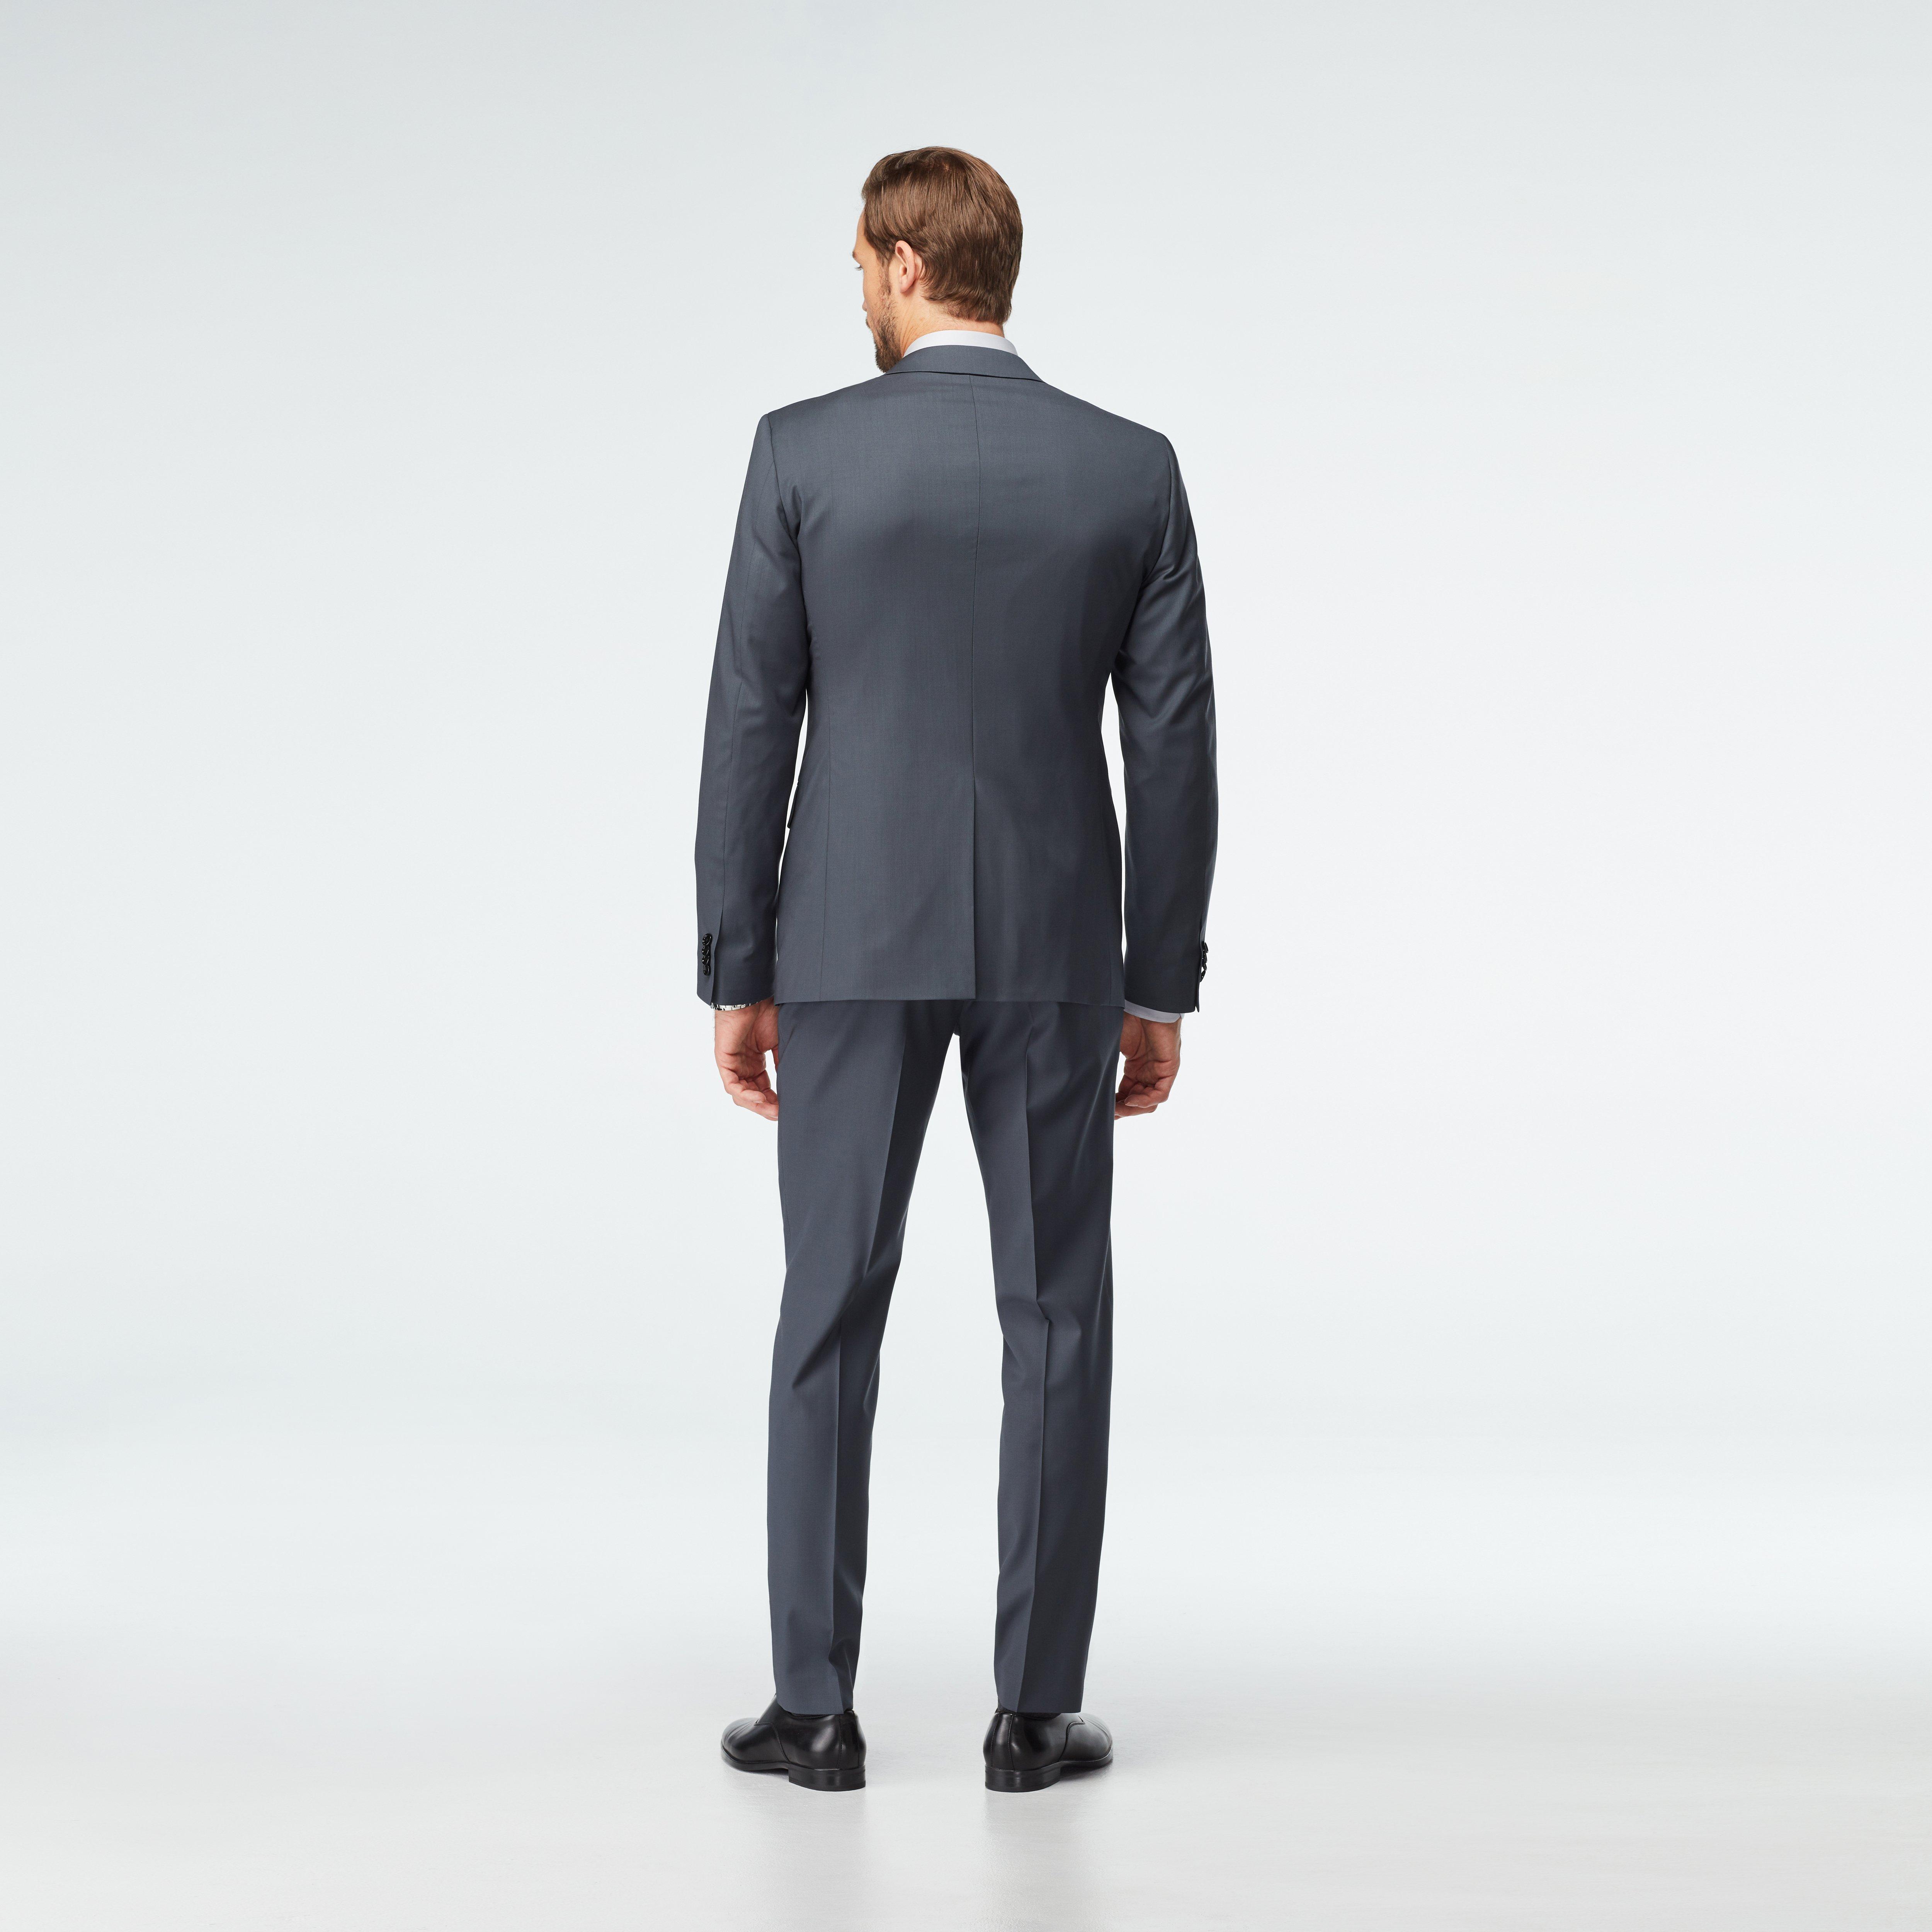 Custom Suits Made For You - Milano Gray Suit | INDOCHINO